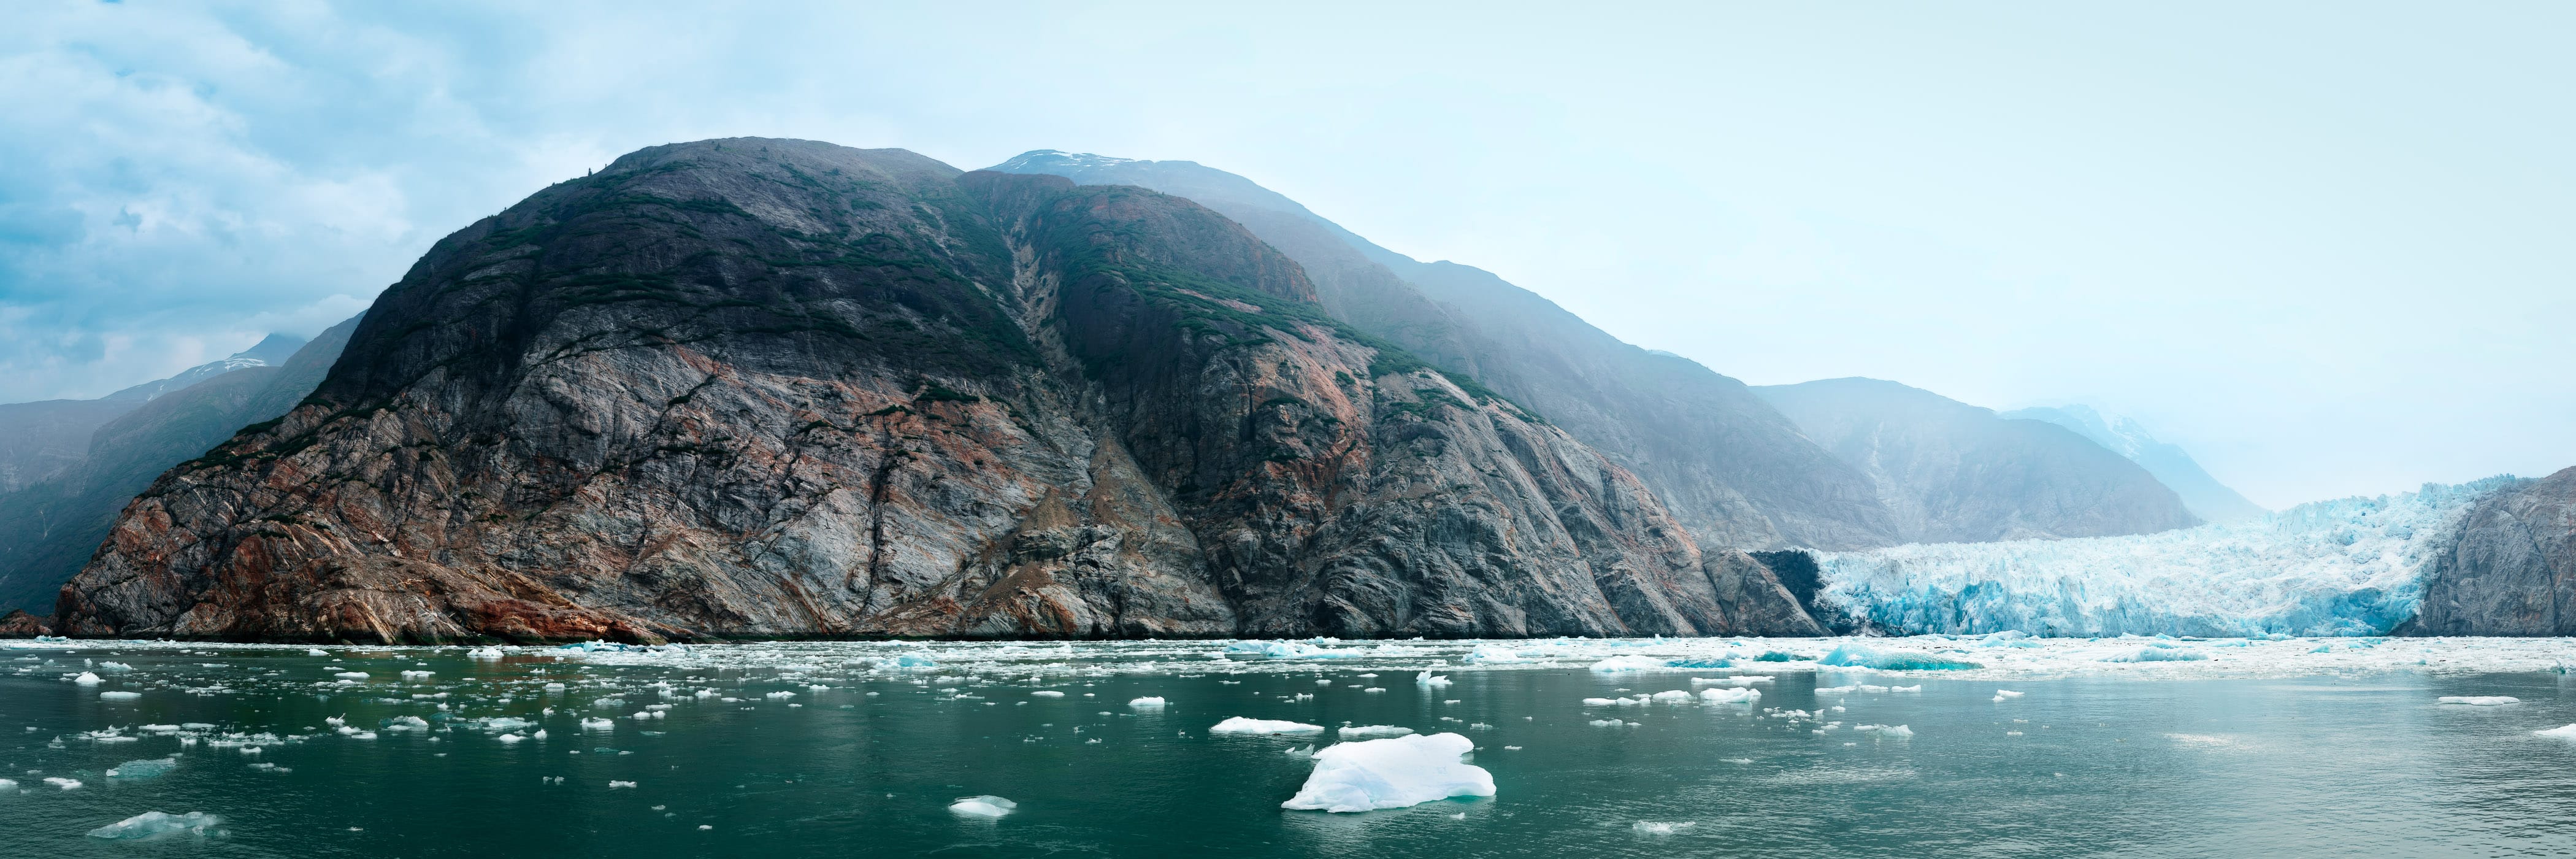 Alaska's South Sawyer Glacier, nestled in the cold, rugged environs of Tracy Arm Fjord.